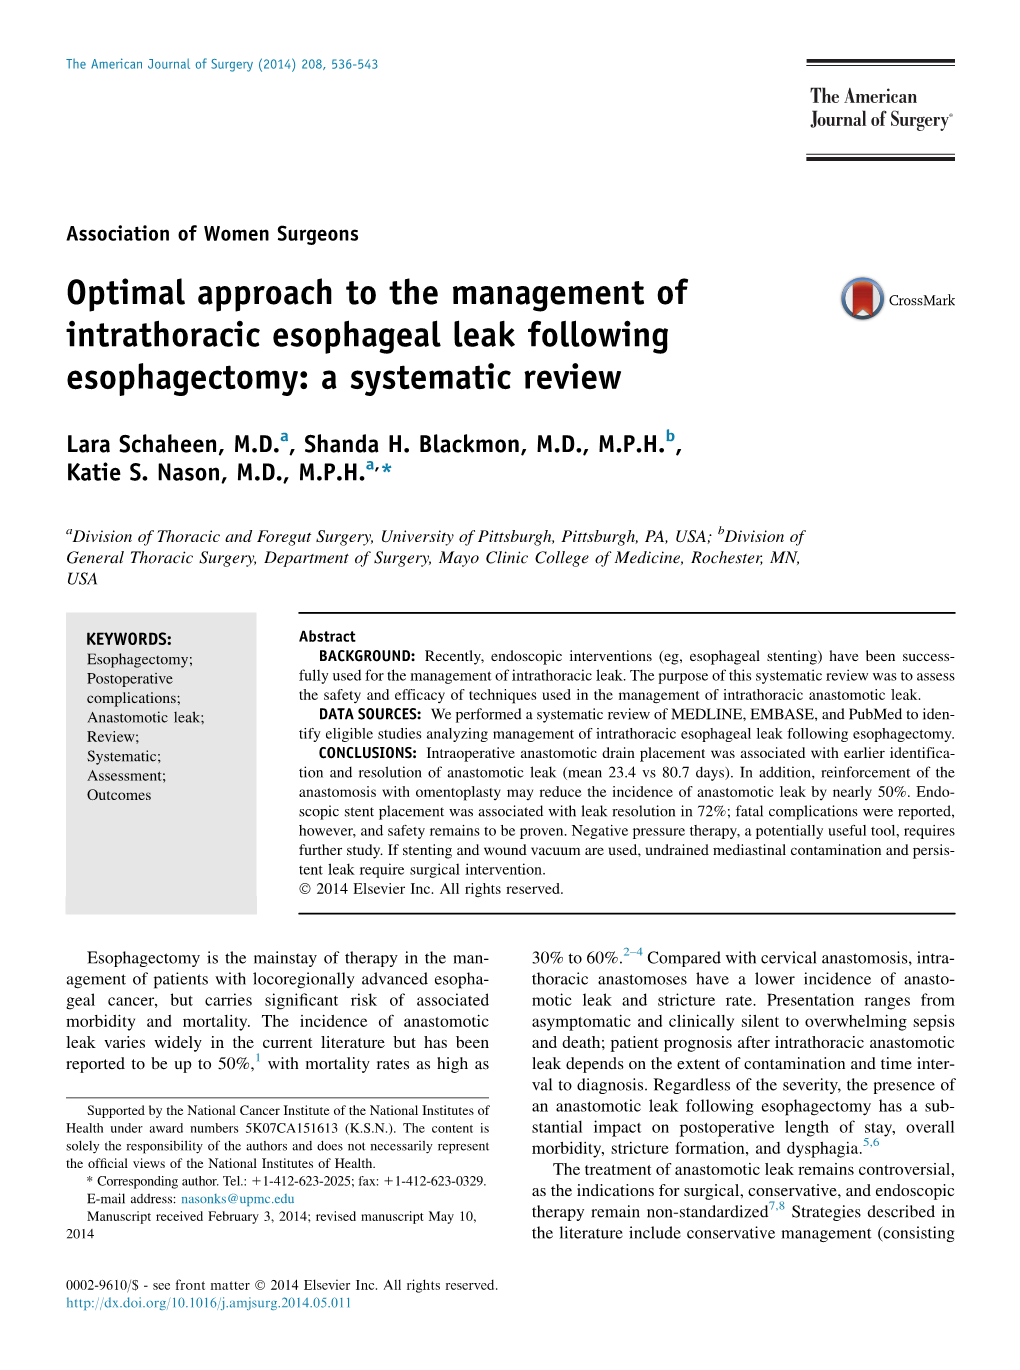 Optimal Approach to the Management of Intrathoracic Esophageal Leak Following Esophagectomy: a Systematic Review